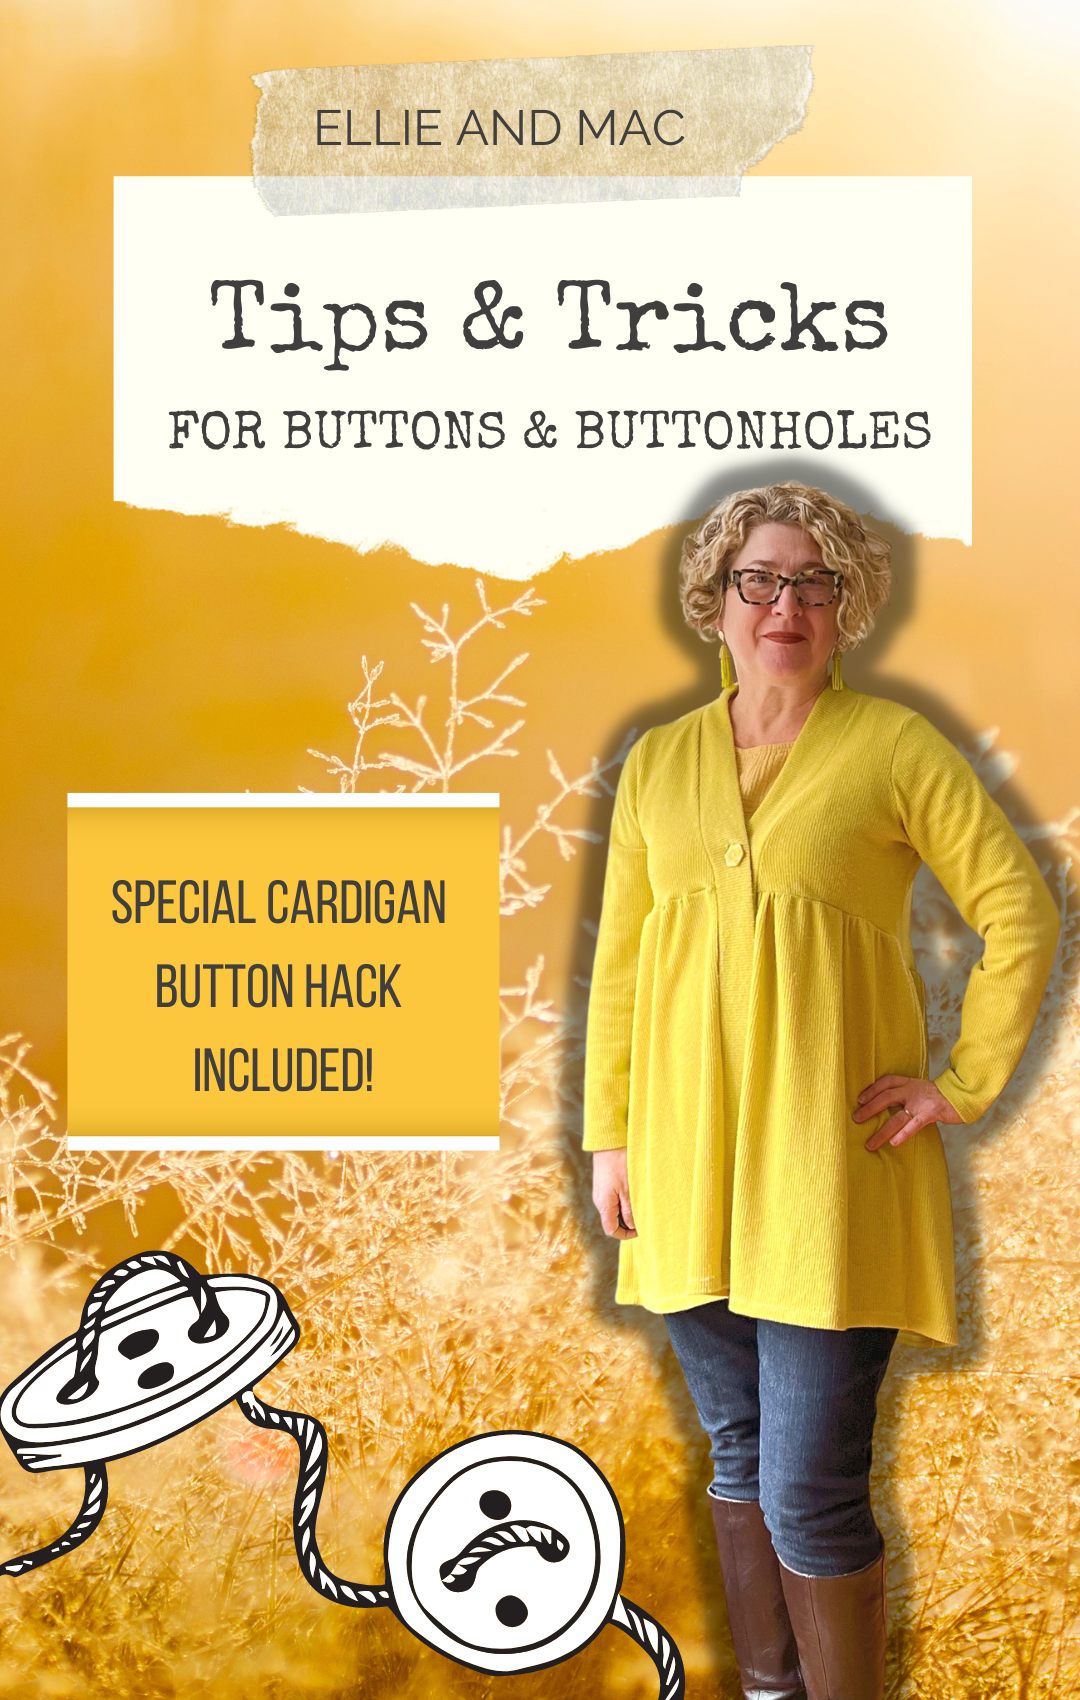 Tips & Tricks for Buttons & Buttonholes (Special Cardigan Button Hack included!)